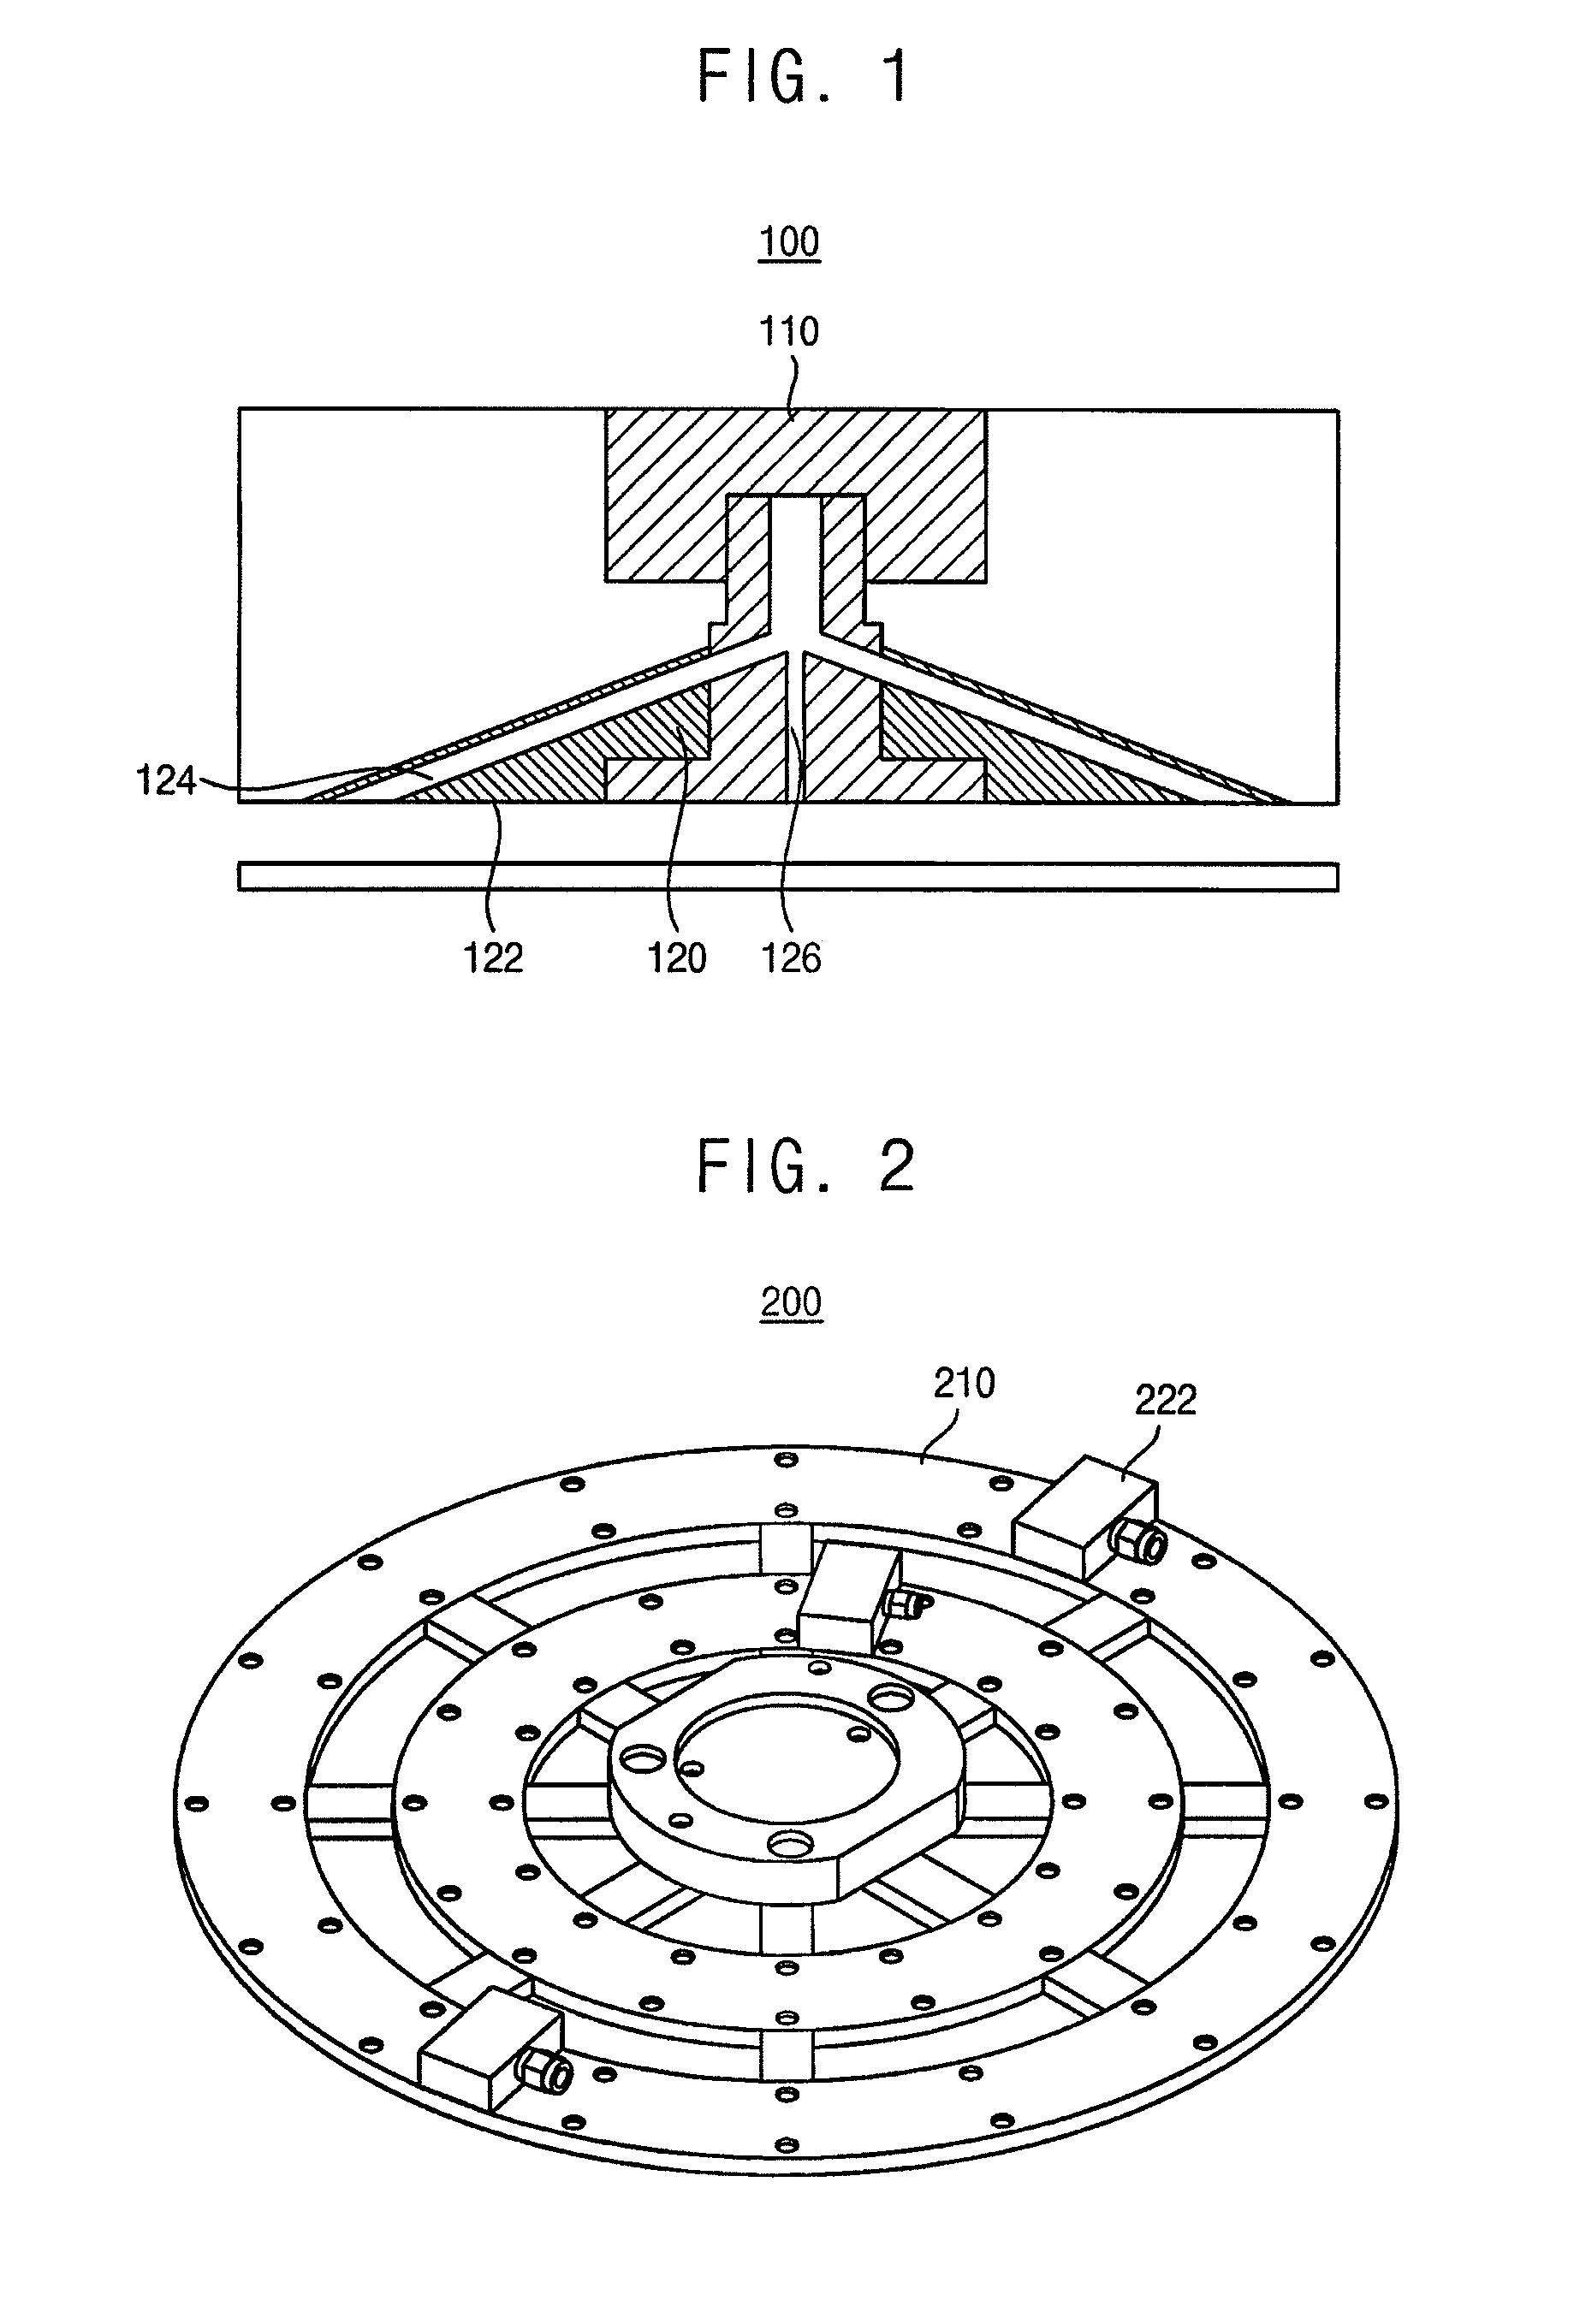 Nozzle for holding a substrate and apparatus for transferring a substrate including the same